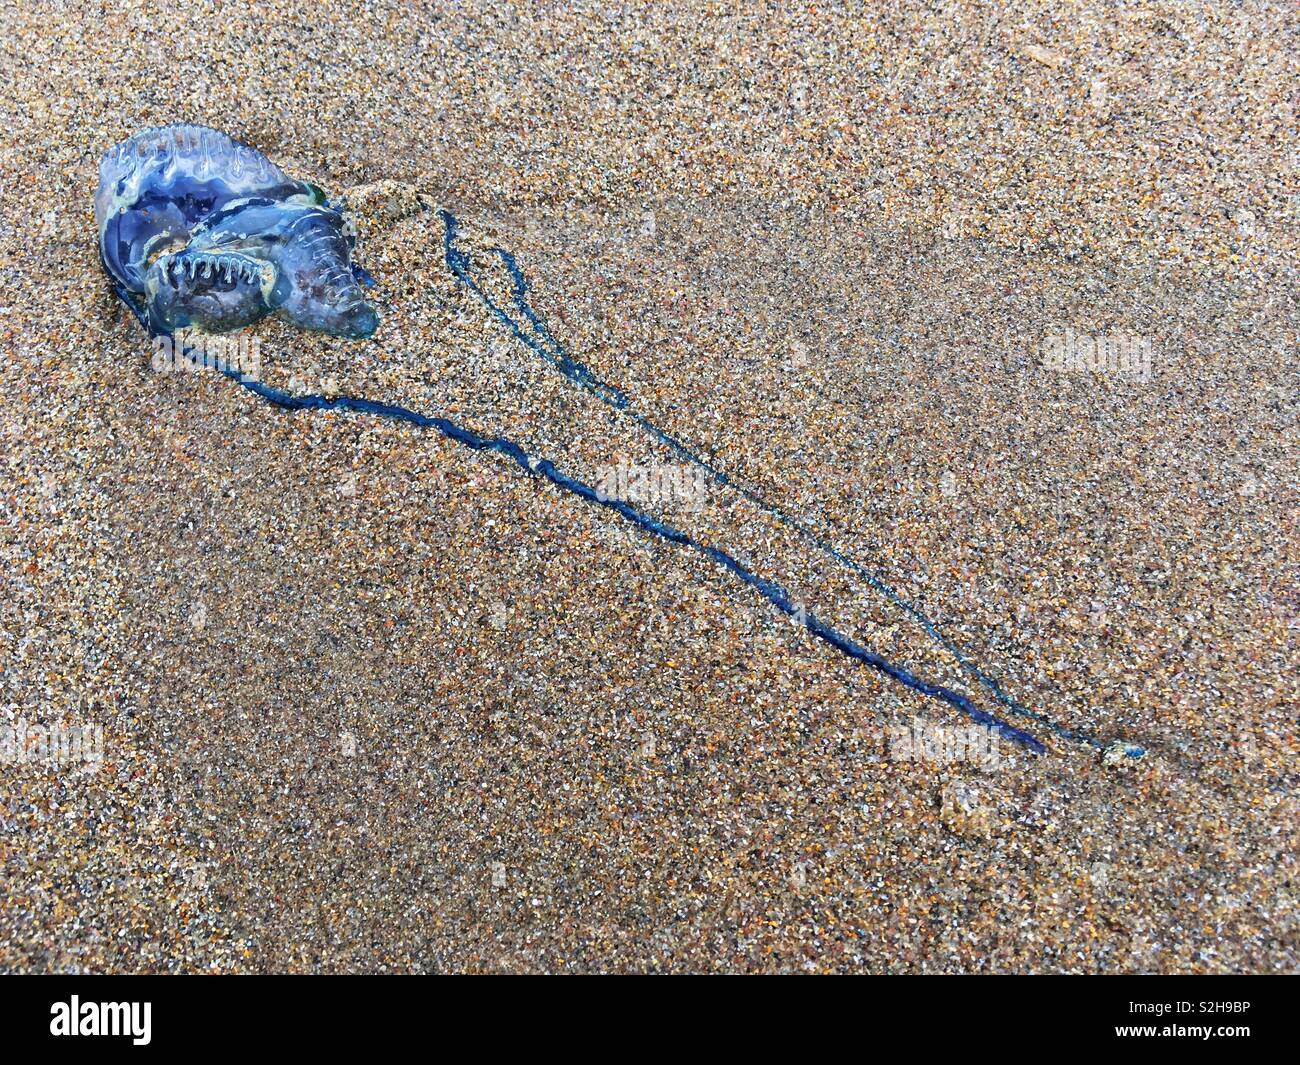 A bluebottle, also known as the Portuguese Man of War, lies washed up on Durban’s South Beach. While not usually deadly, these jellyfish-like creatures can deliver an agonizing sting. Stock Photo